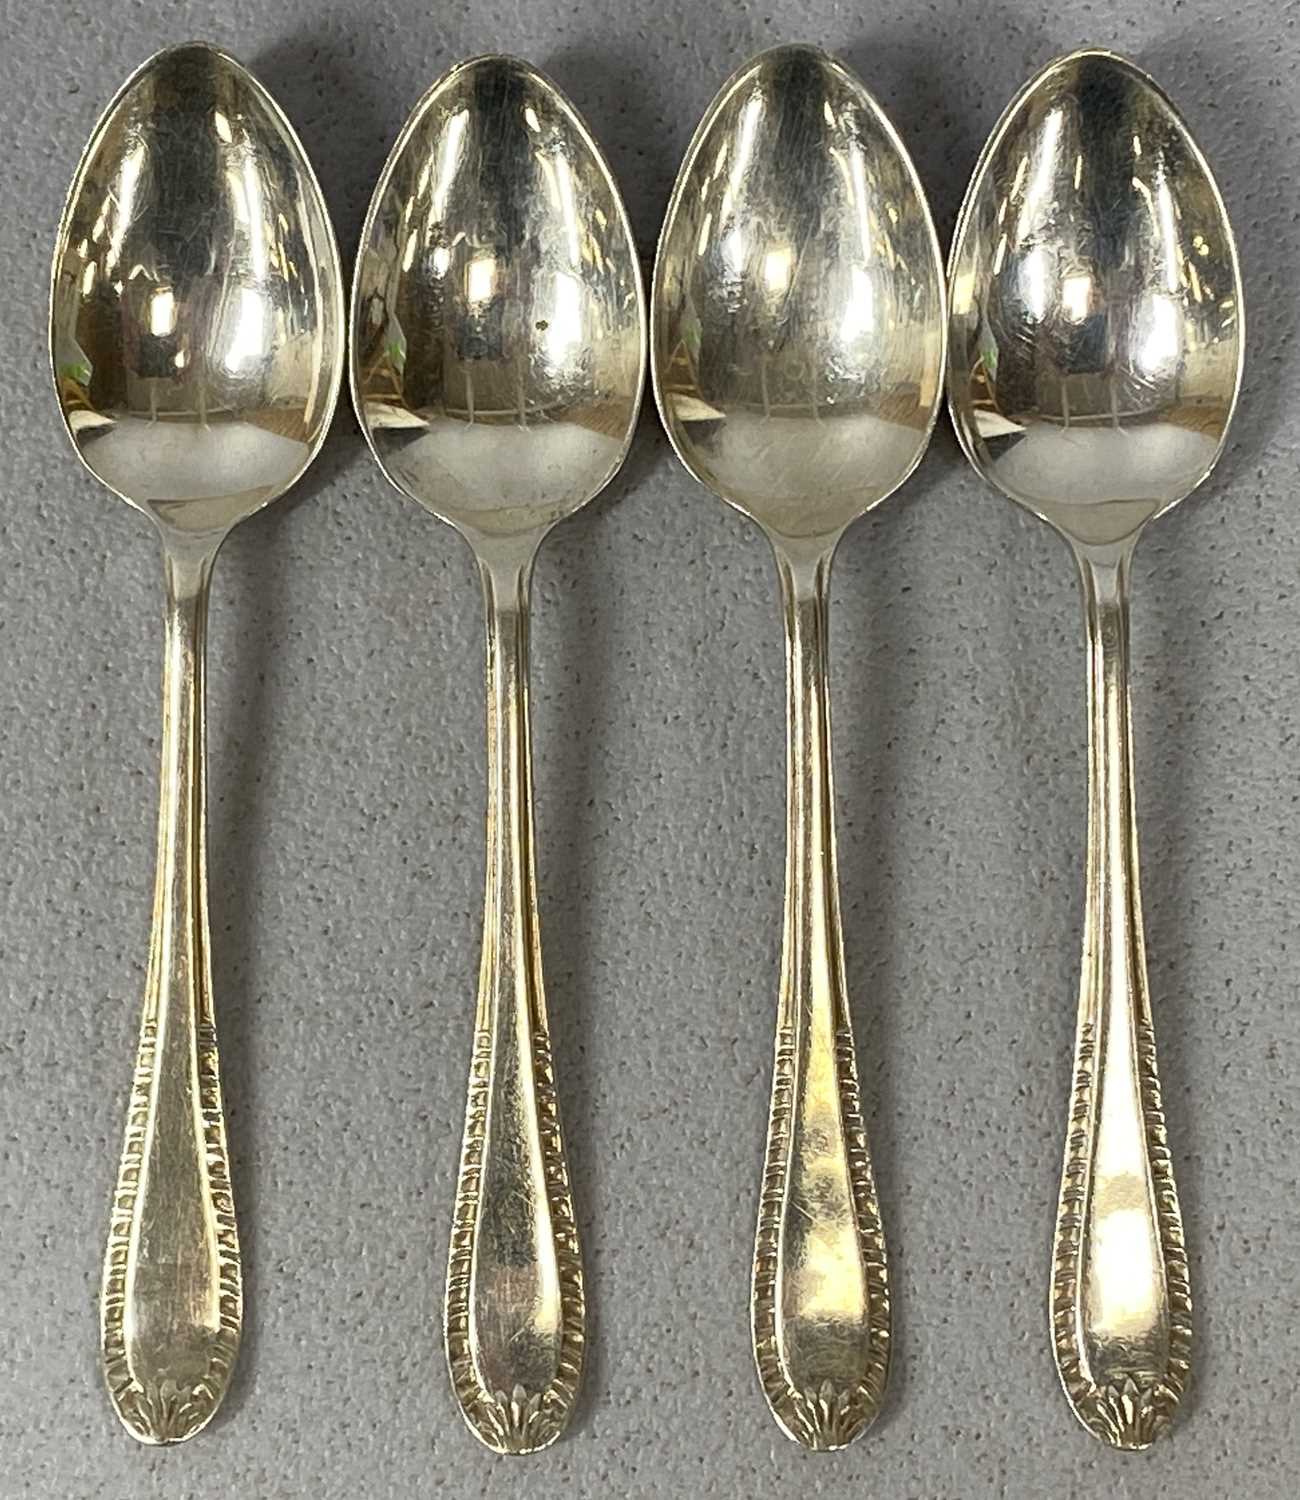 GEORGE III / VICTORIAN COLLECTION OF SILVER SPOONS, SAUCE LADLES & SUGAR TONGS, 15, 3 and 1 - Image 3 of 3